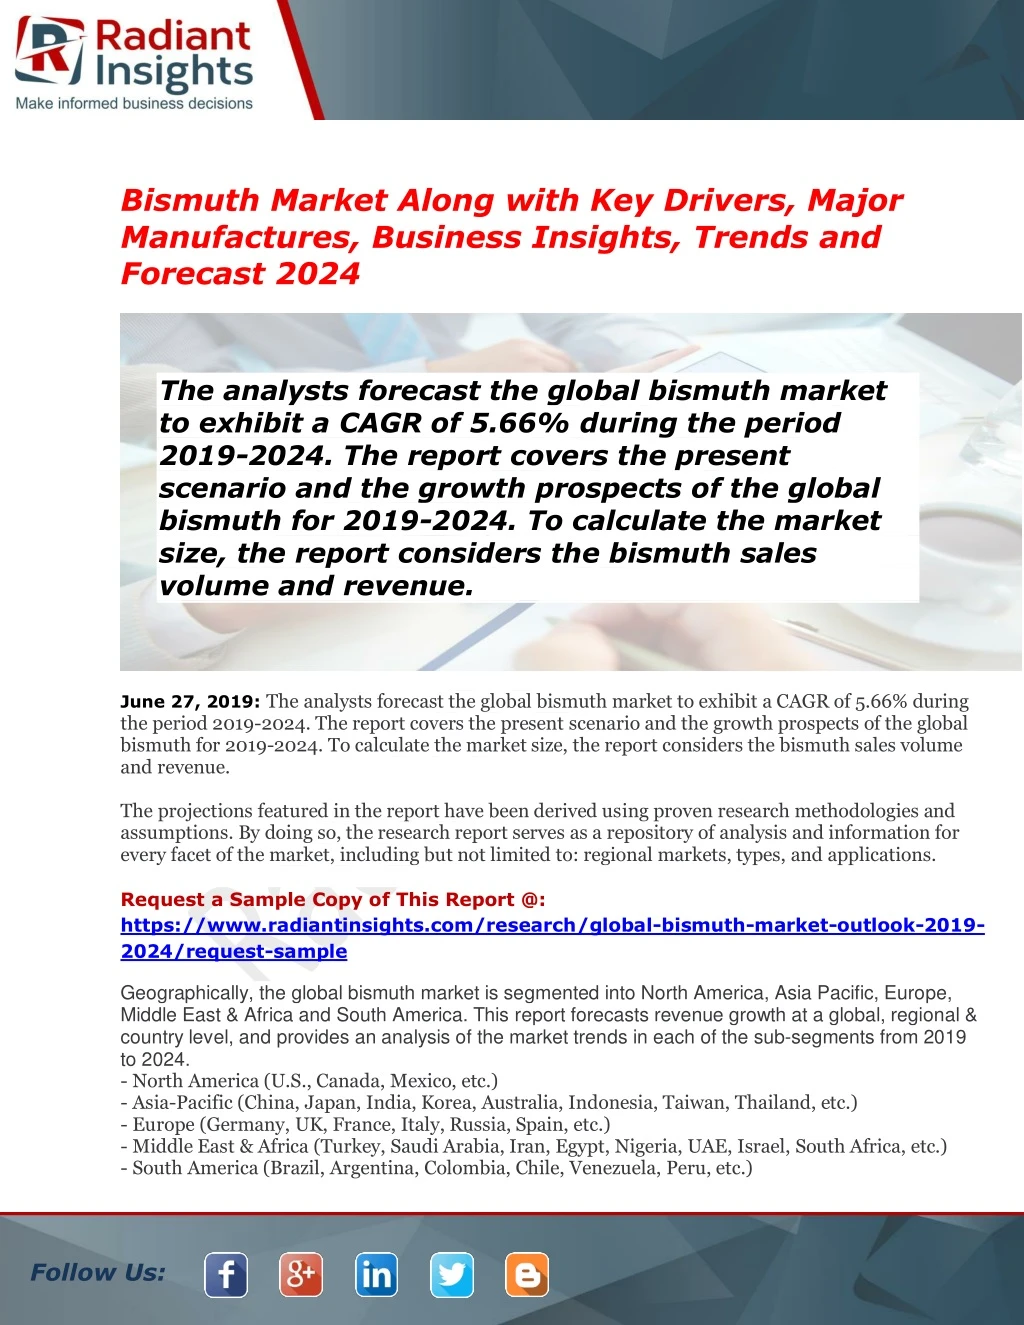 bismuth market along with key drivers major